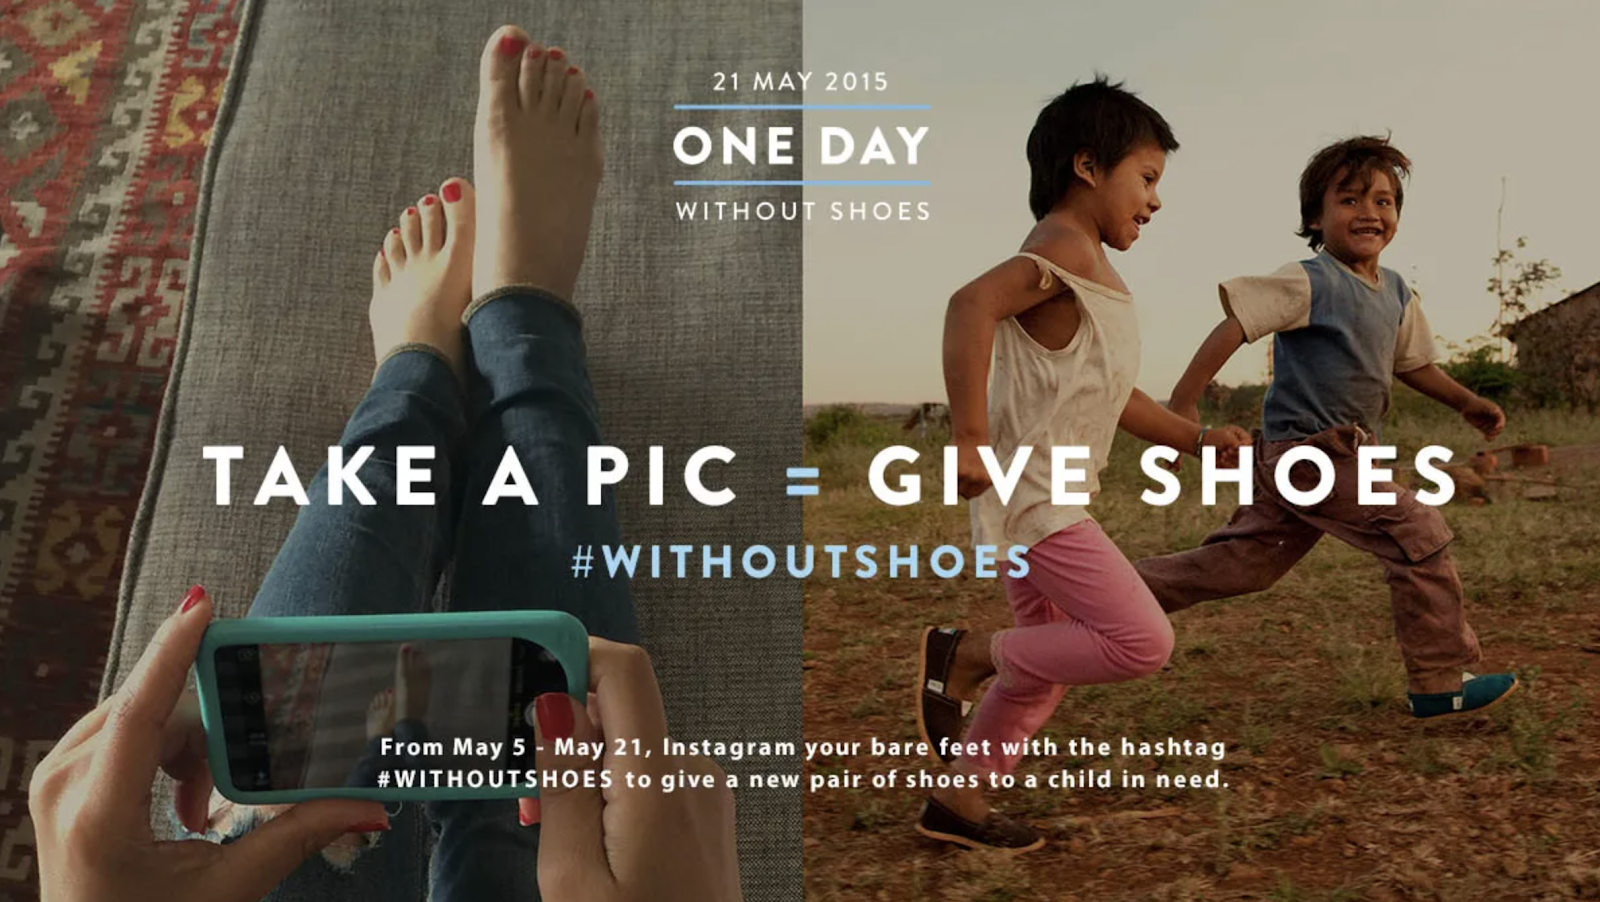 Brand Story Examples - TOMS